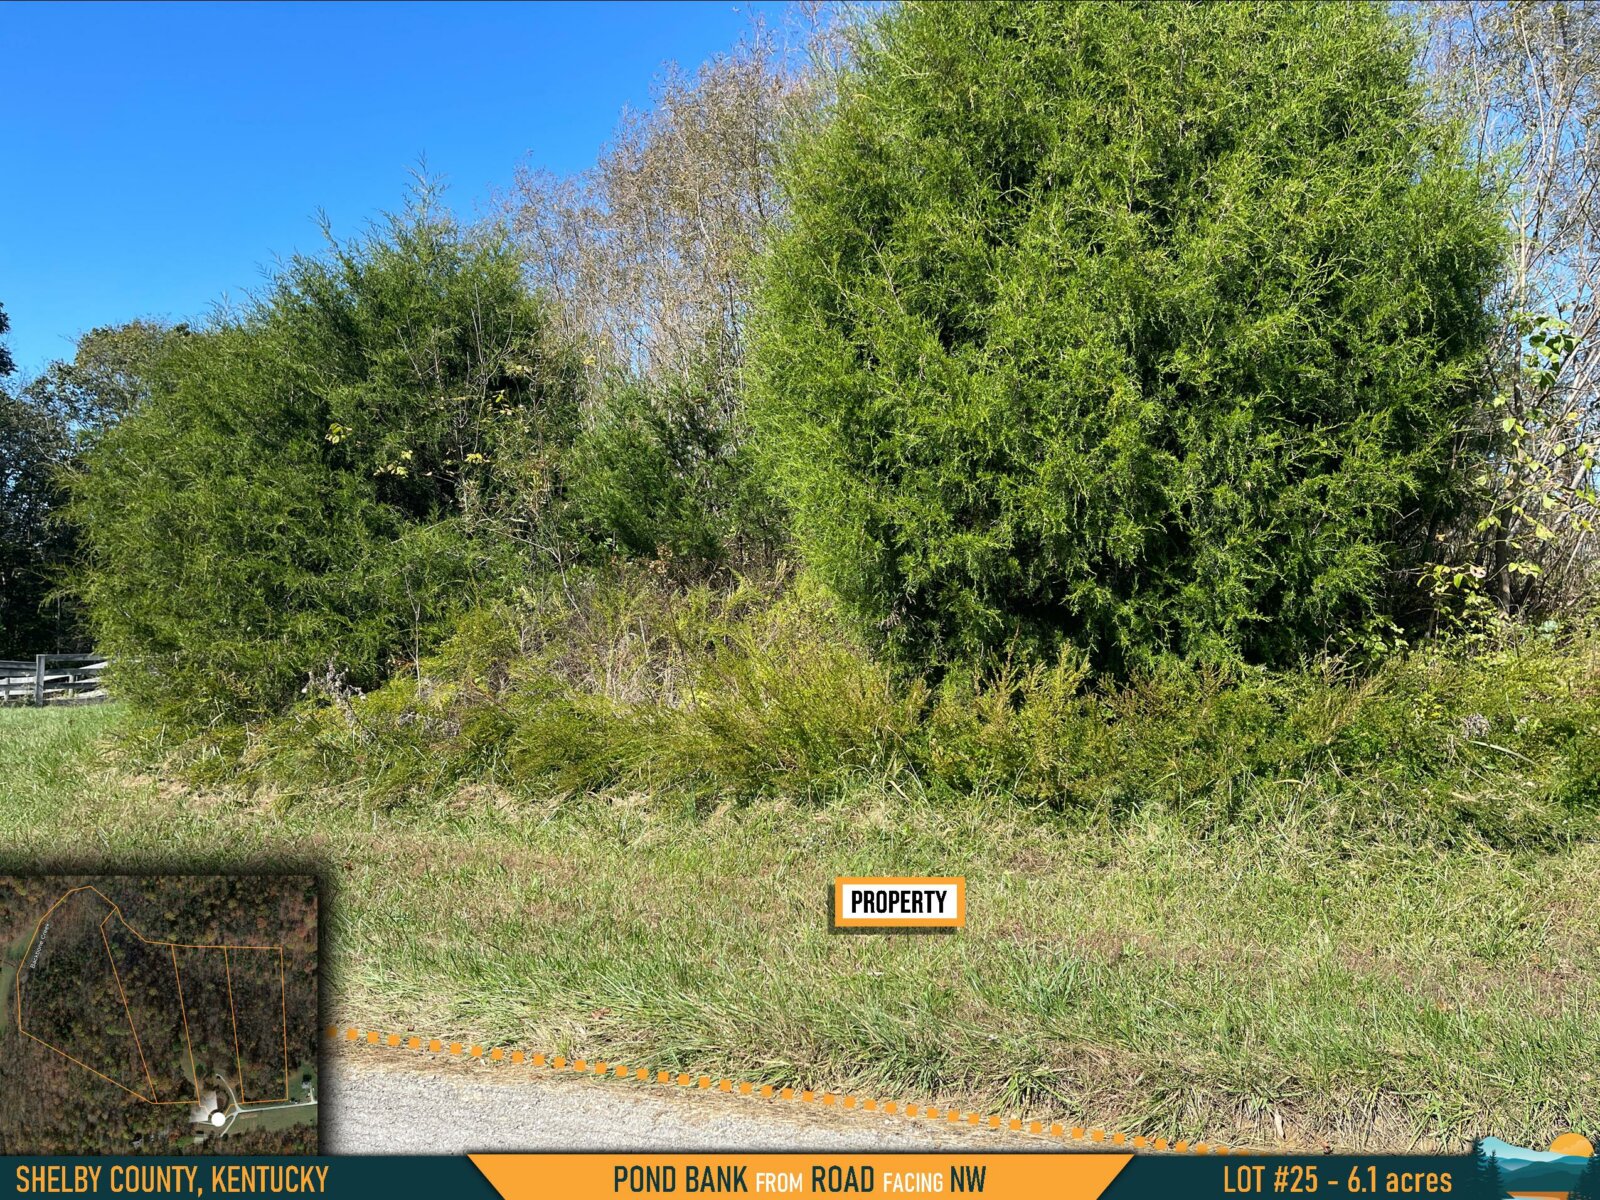 SHELBY COUNTY, KY | 6.1 acres | The “Red Carpet” Lot | Partially-cleared w/Driveway & Pond